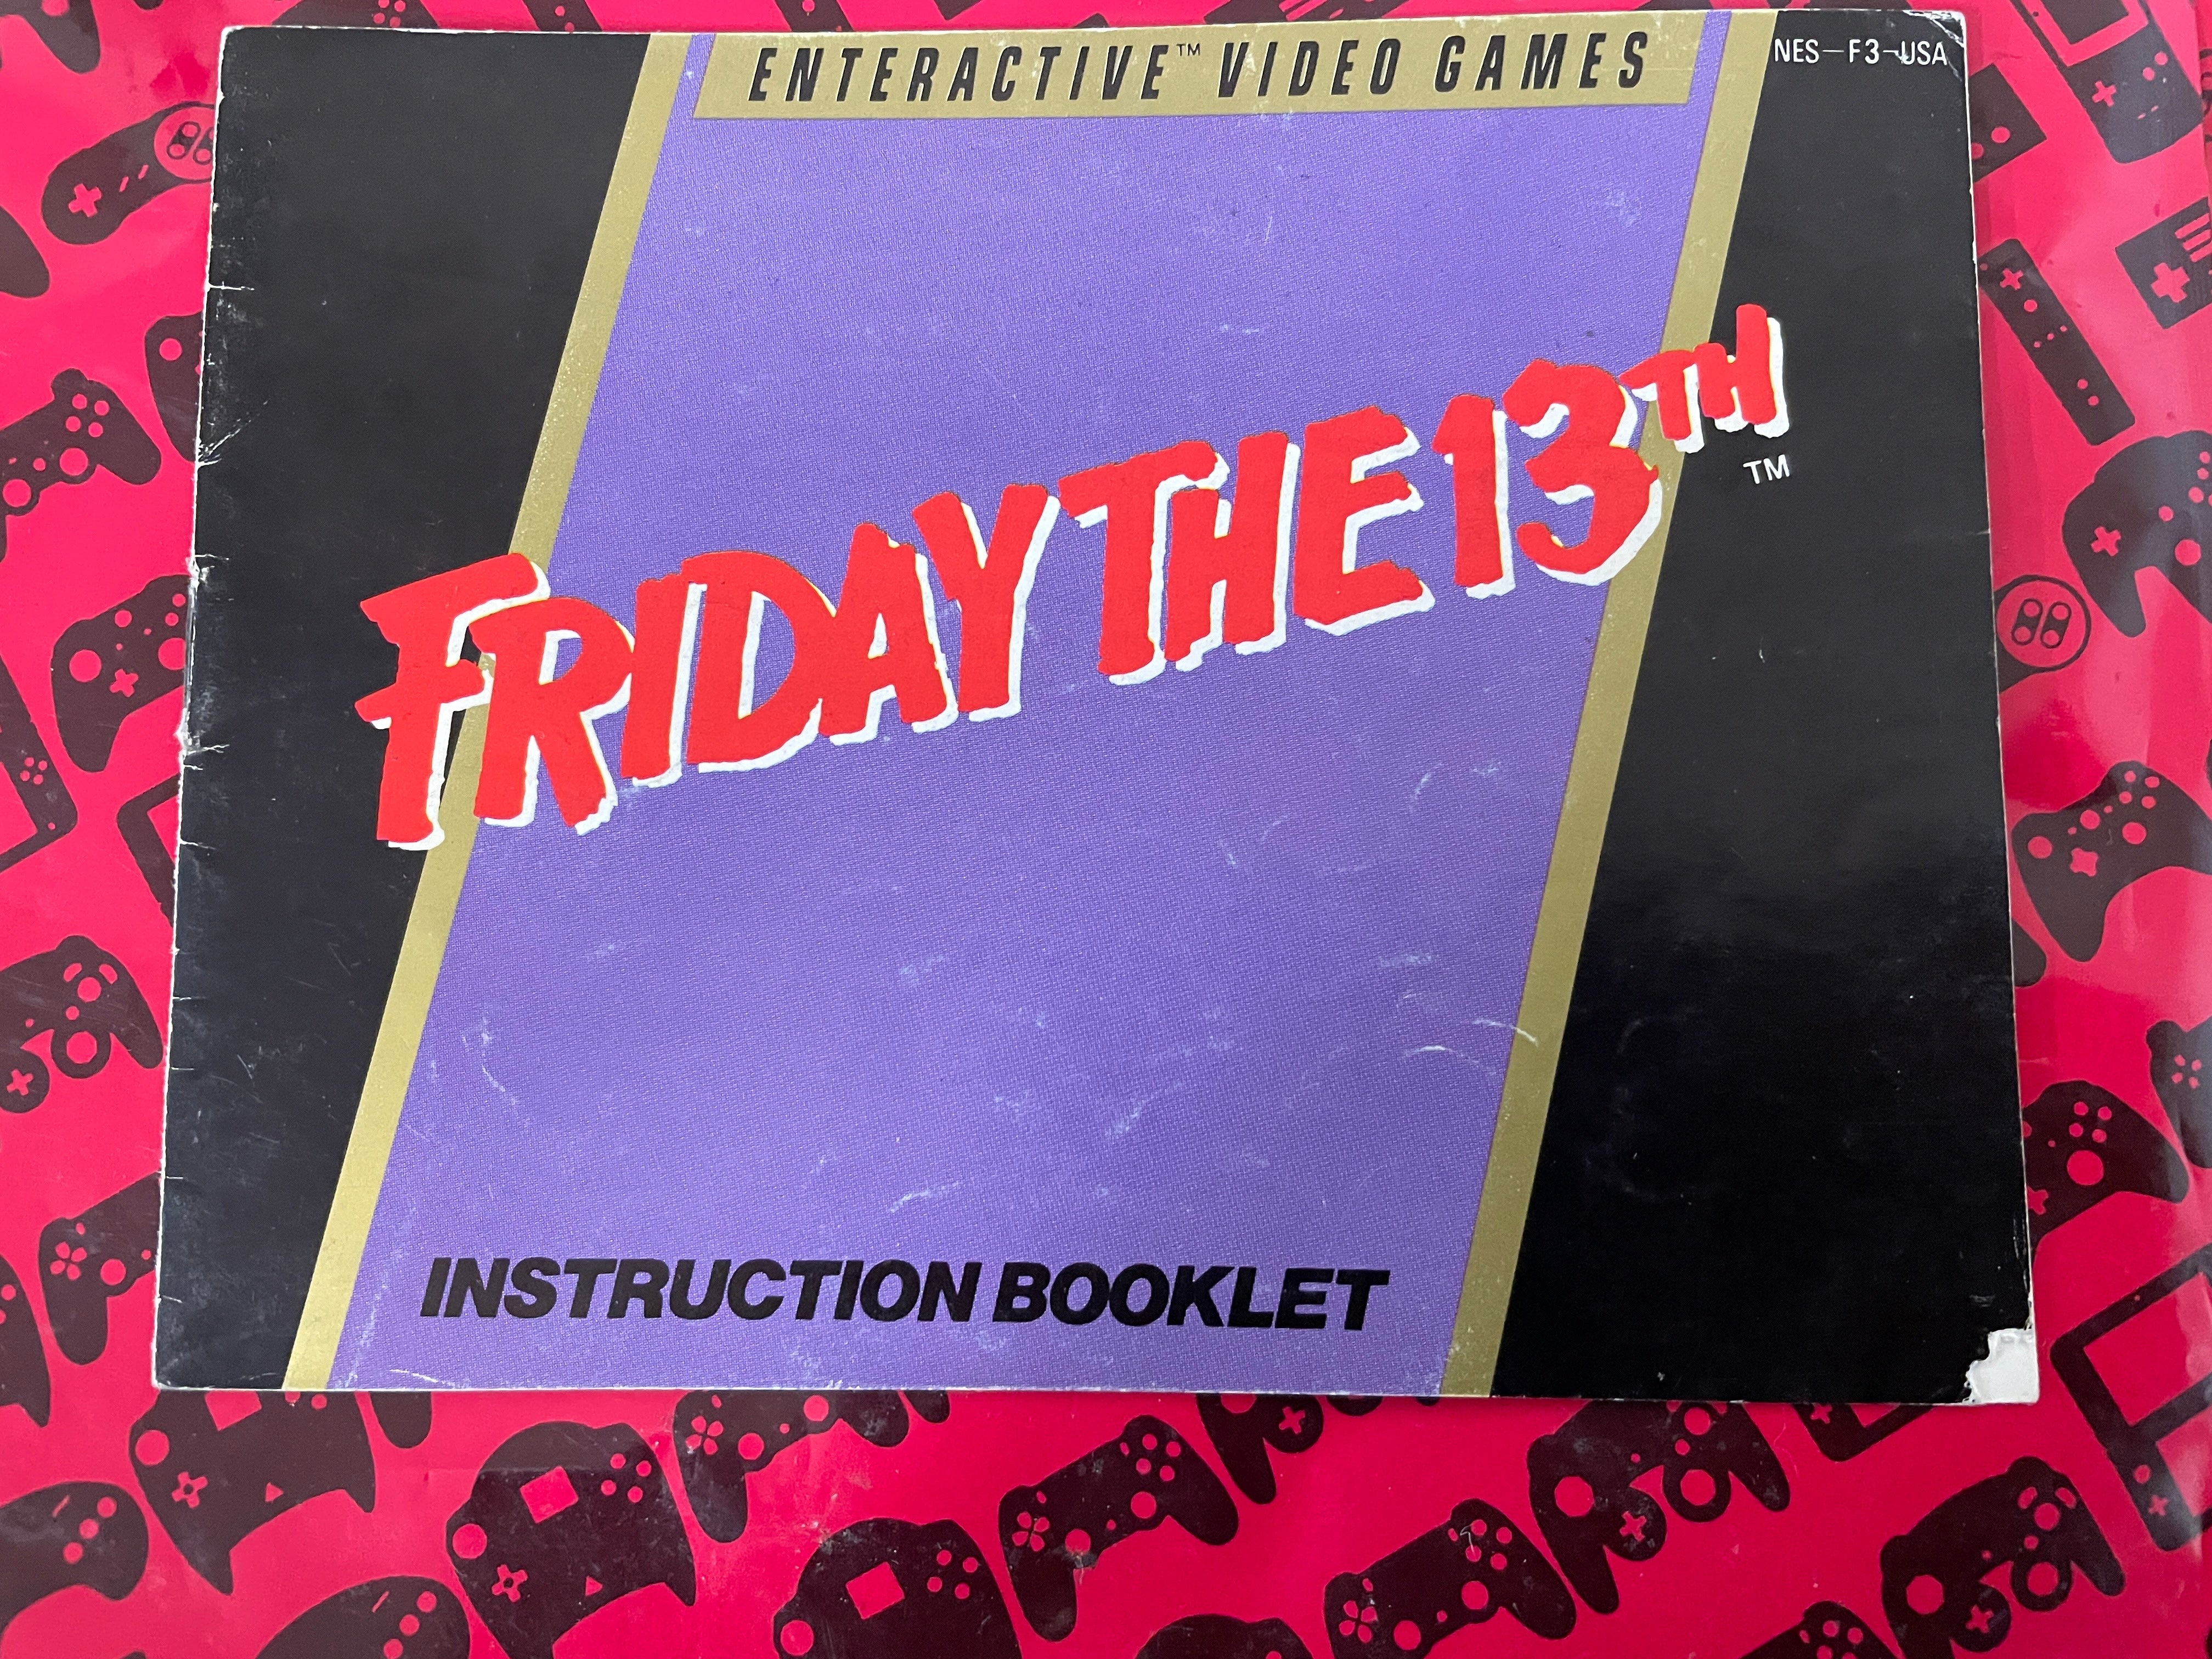  Friday the 13th: The NES Game